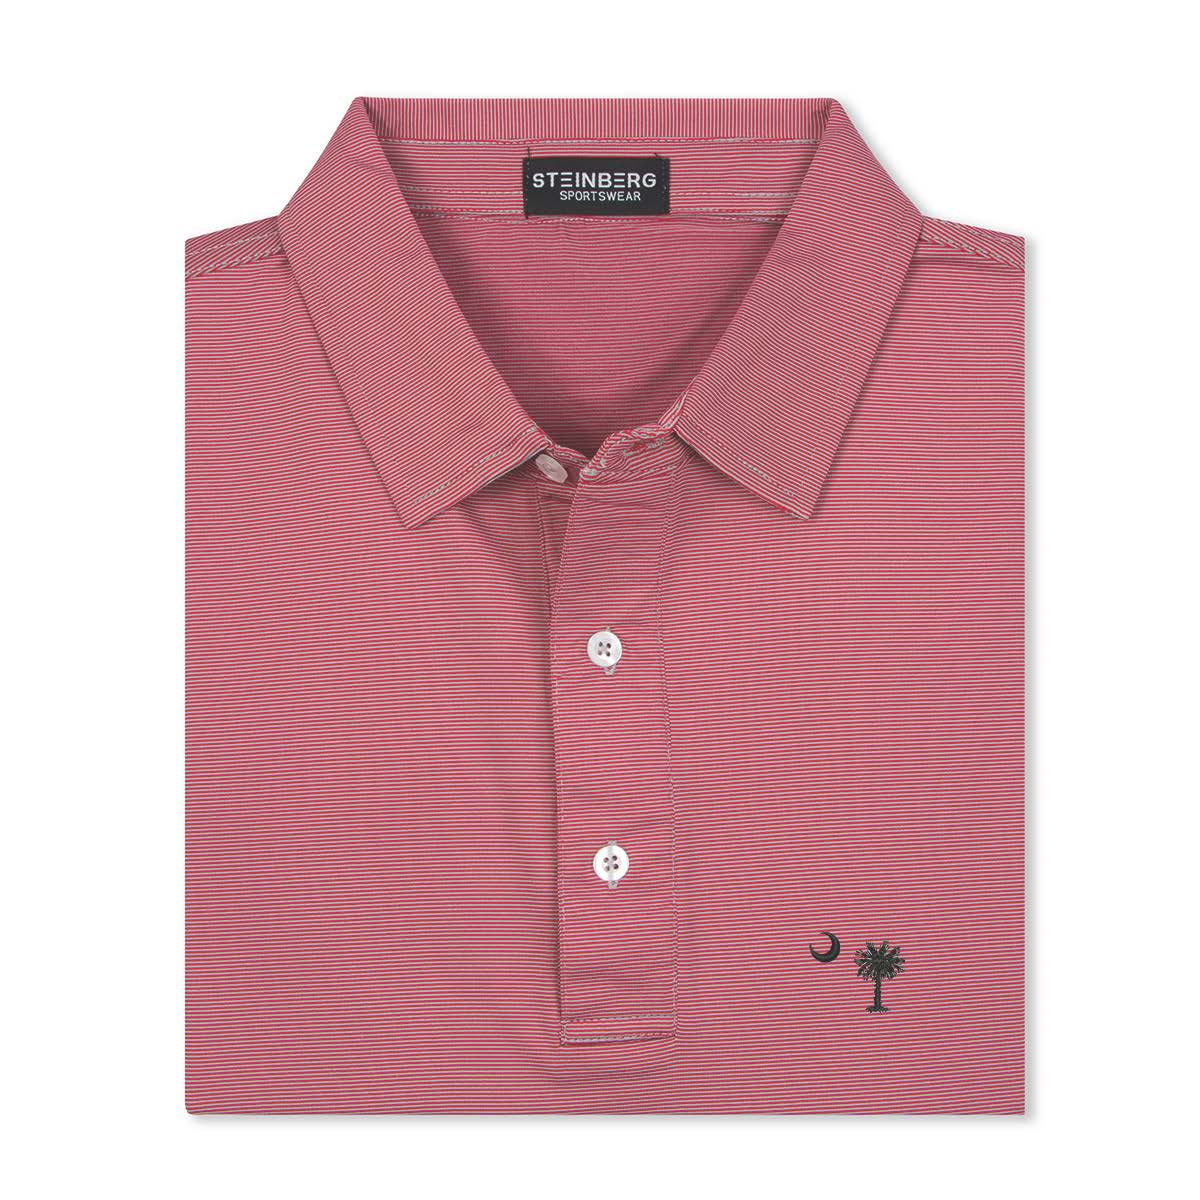 The Chili Dip Performance Polo the Palmetto Moon Collection